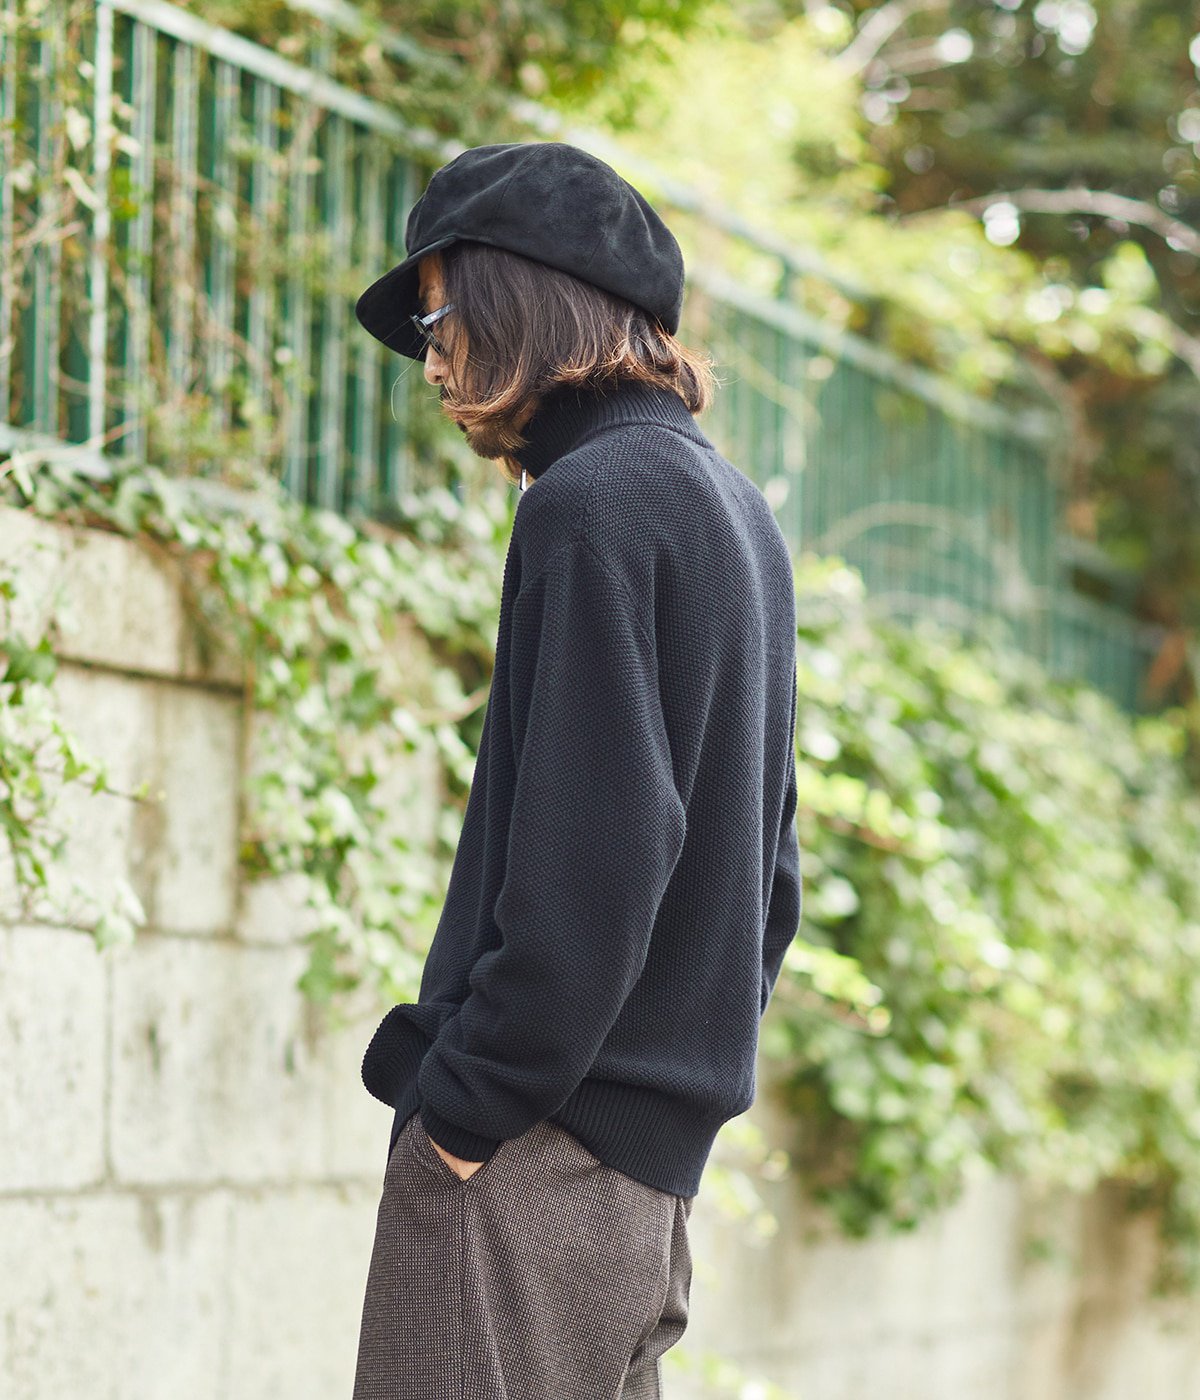 【ONLY ARK】 別注 TWISTED WOOL PIQUE DRIVERS KNIT